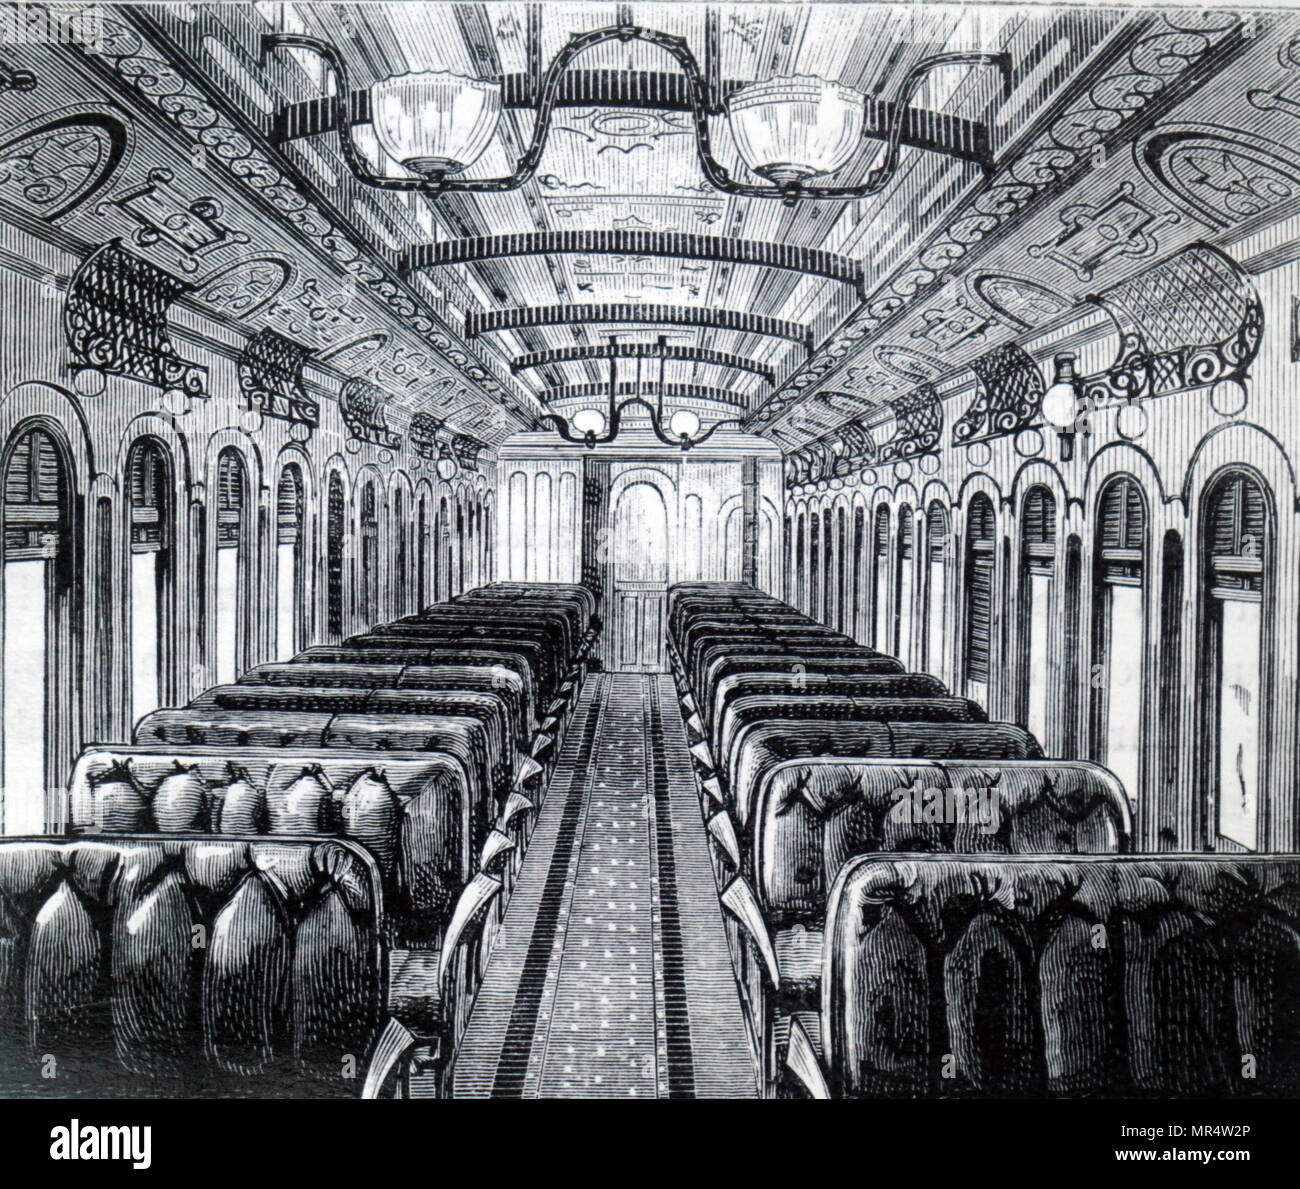 Engraving depicting the interior of a typical American railway car. Dated 19th century Stock Photo